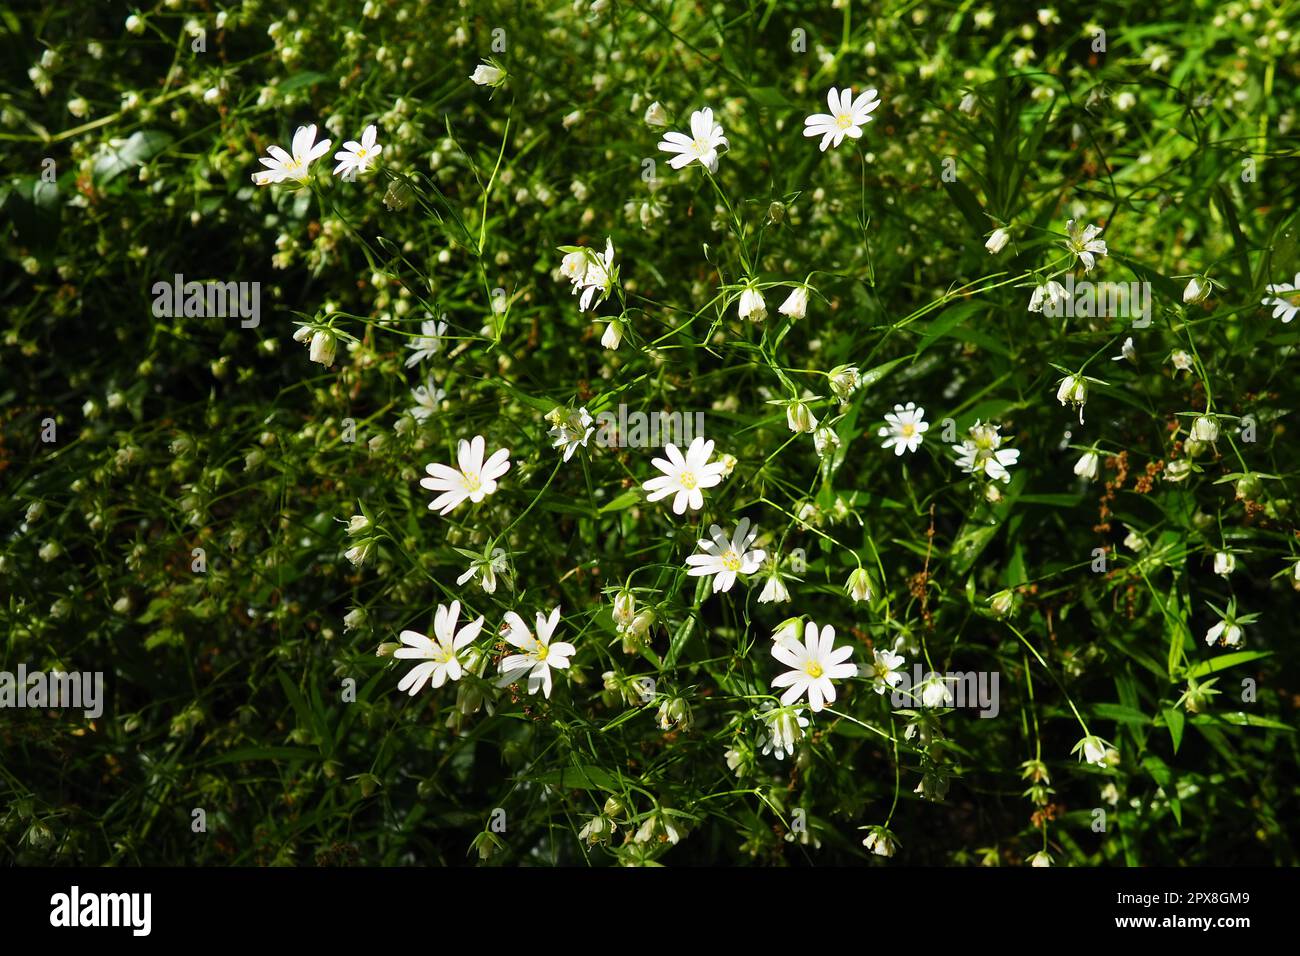 Starflower Stellaria is a genus of flowering plants in the Carnation family. Wood louse plant. White flowers in the forest. Fruska Gora, Serbia. beaut Stock Photo